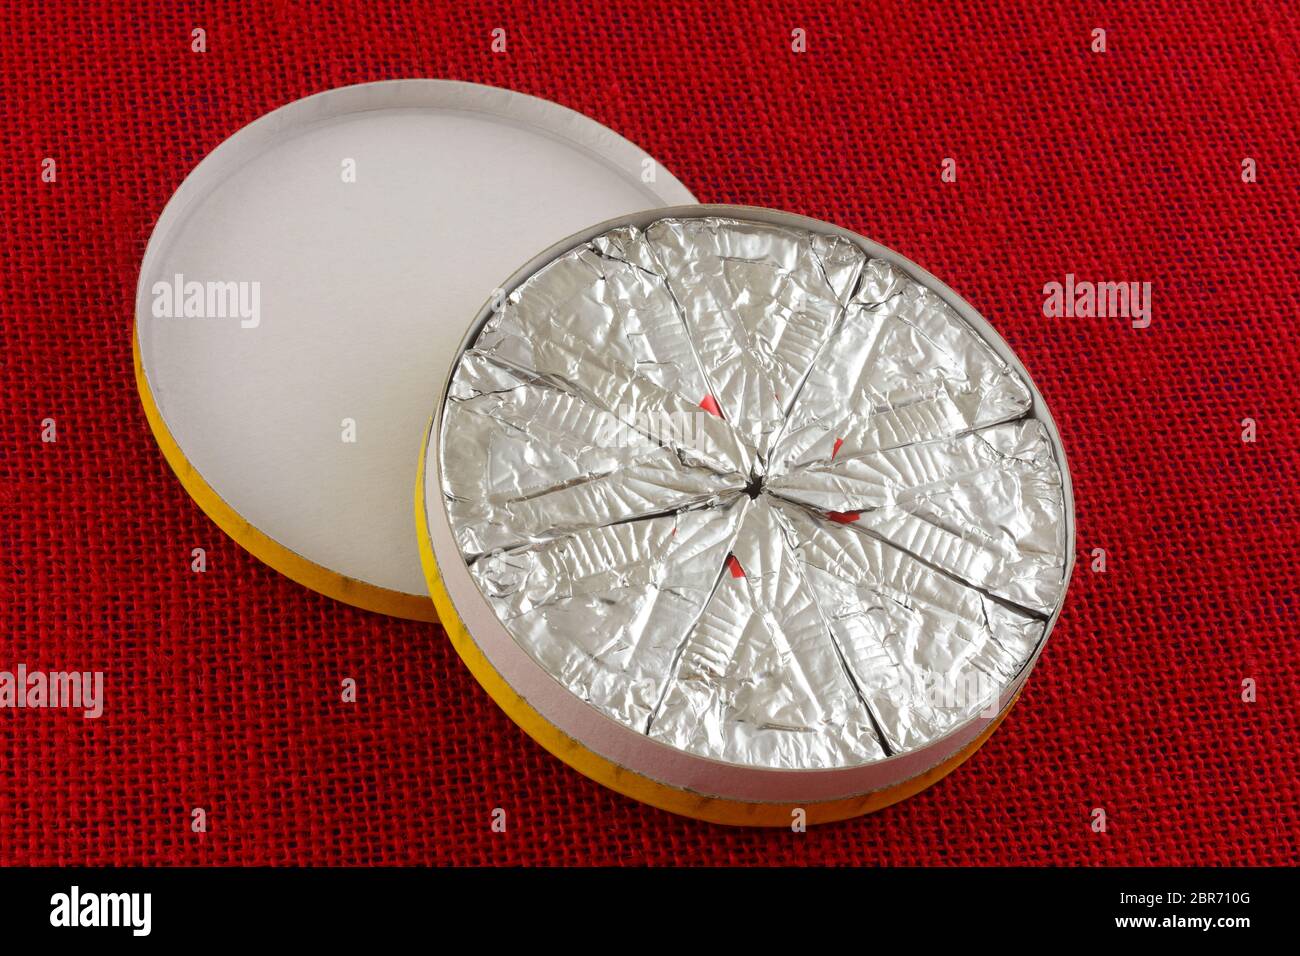 Wheel of individually sliced mini slices of brie cheese in cardboard box on red tablecloth Stock Photo